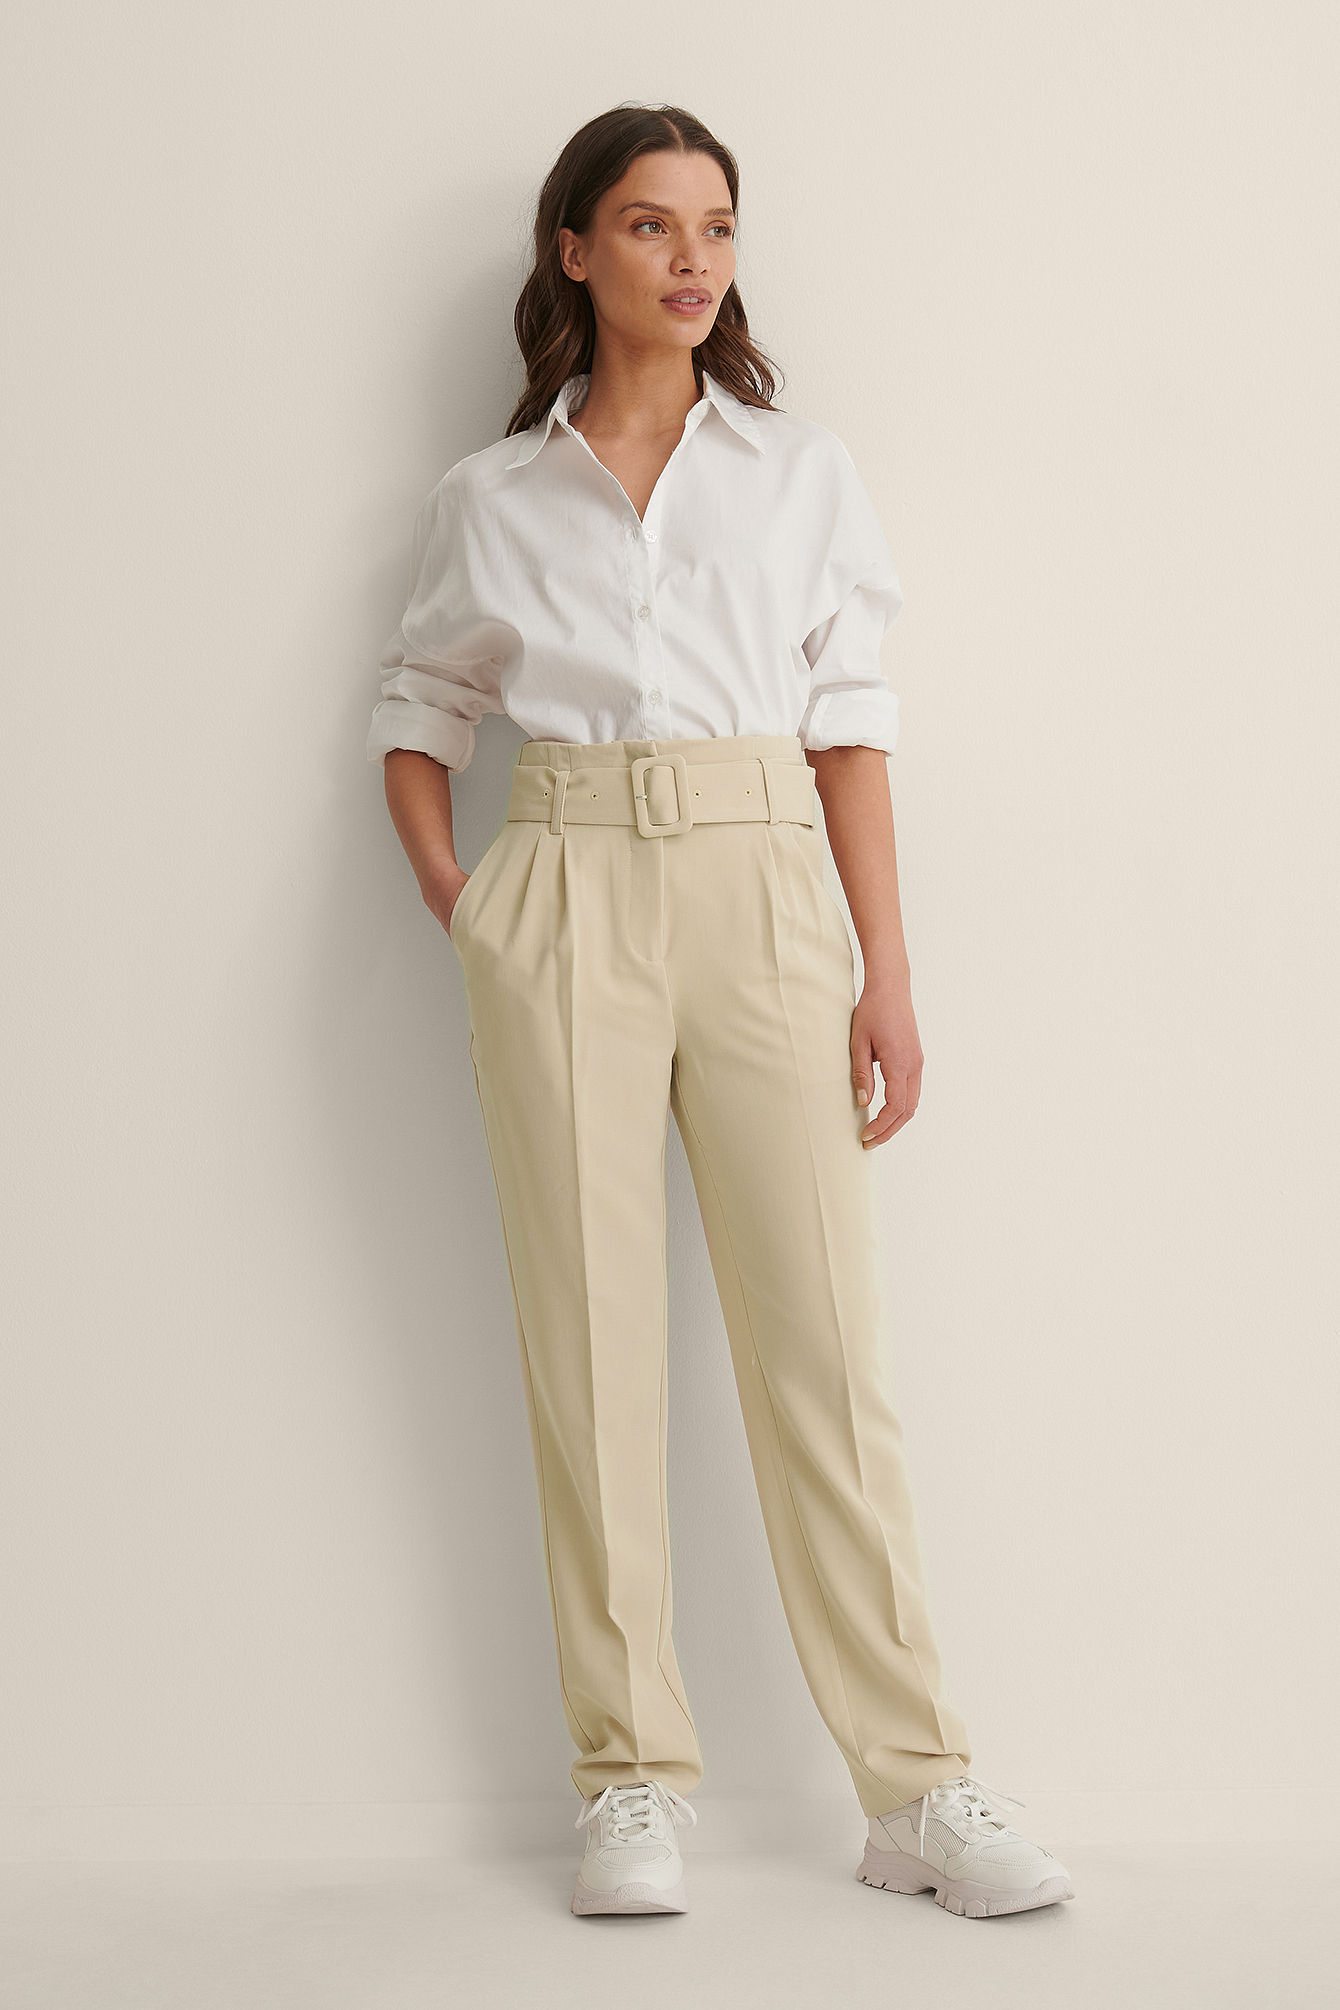 Belted Suit Pants Outfit